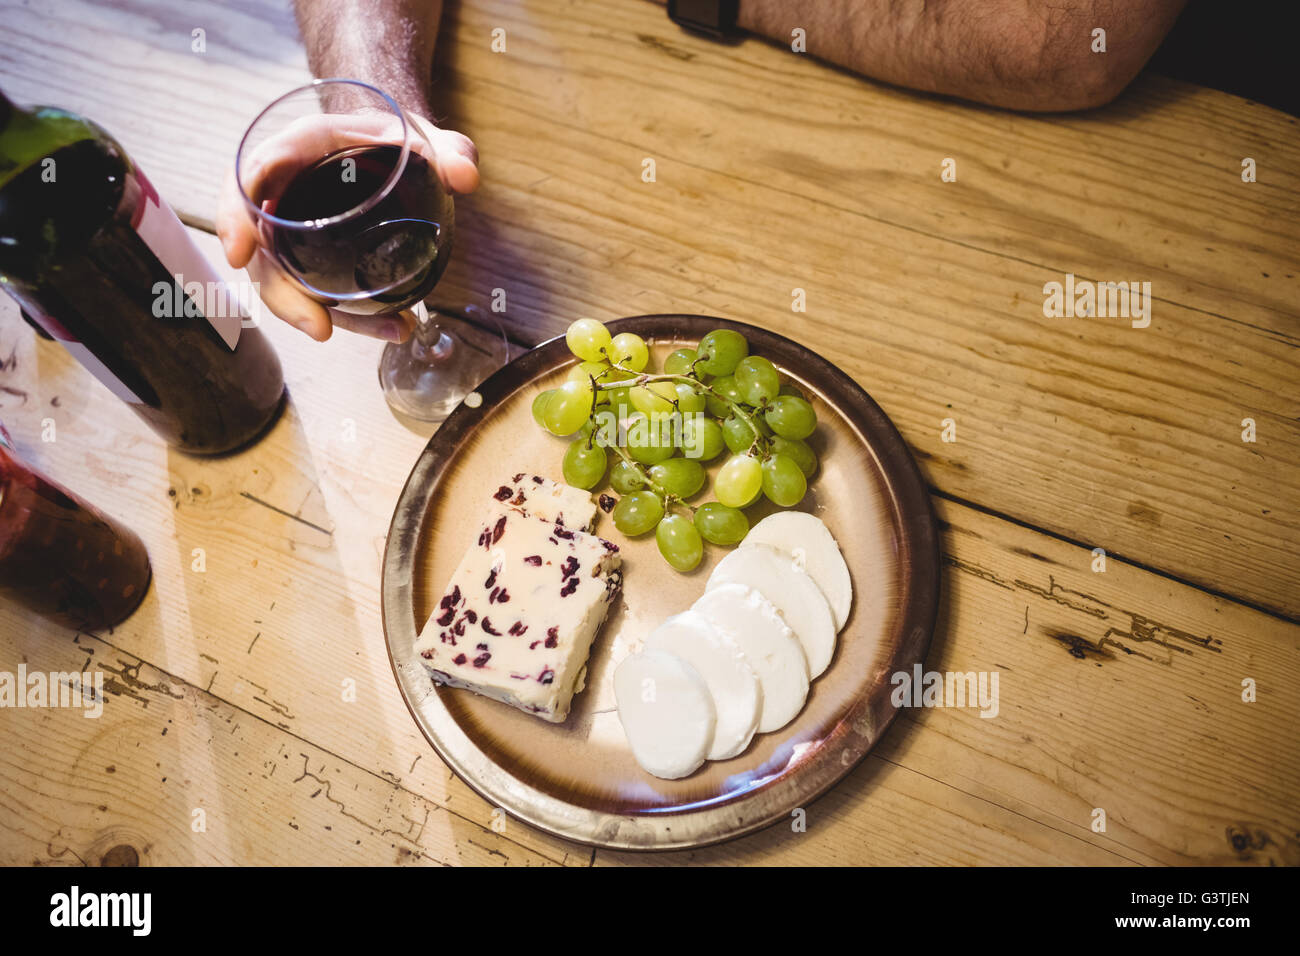 Close up view of red wine glass and cheeses Stock Photo